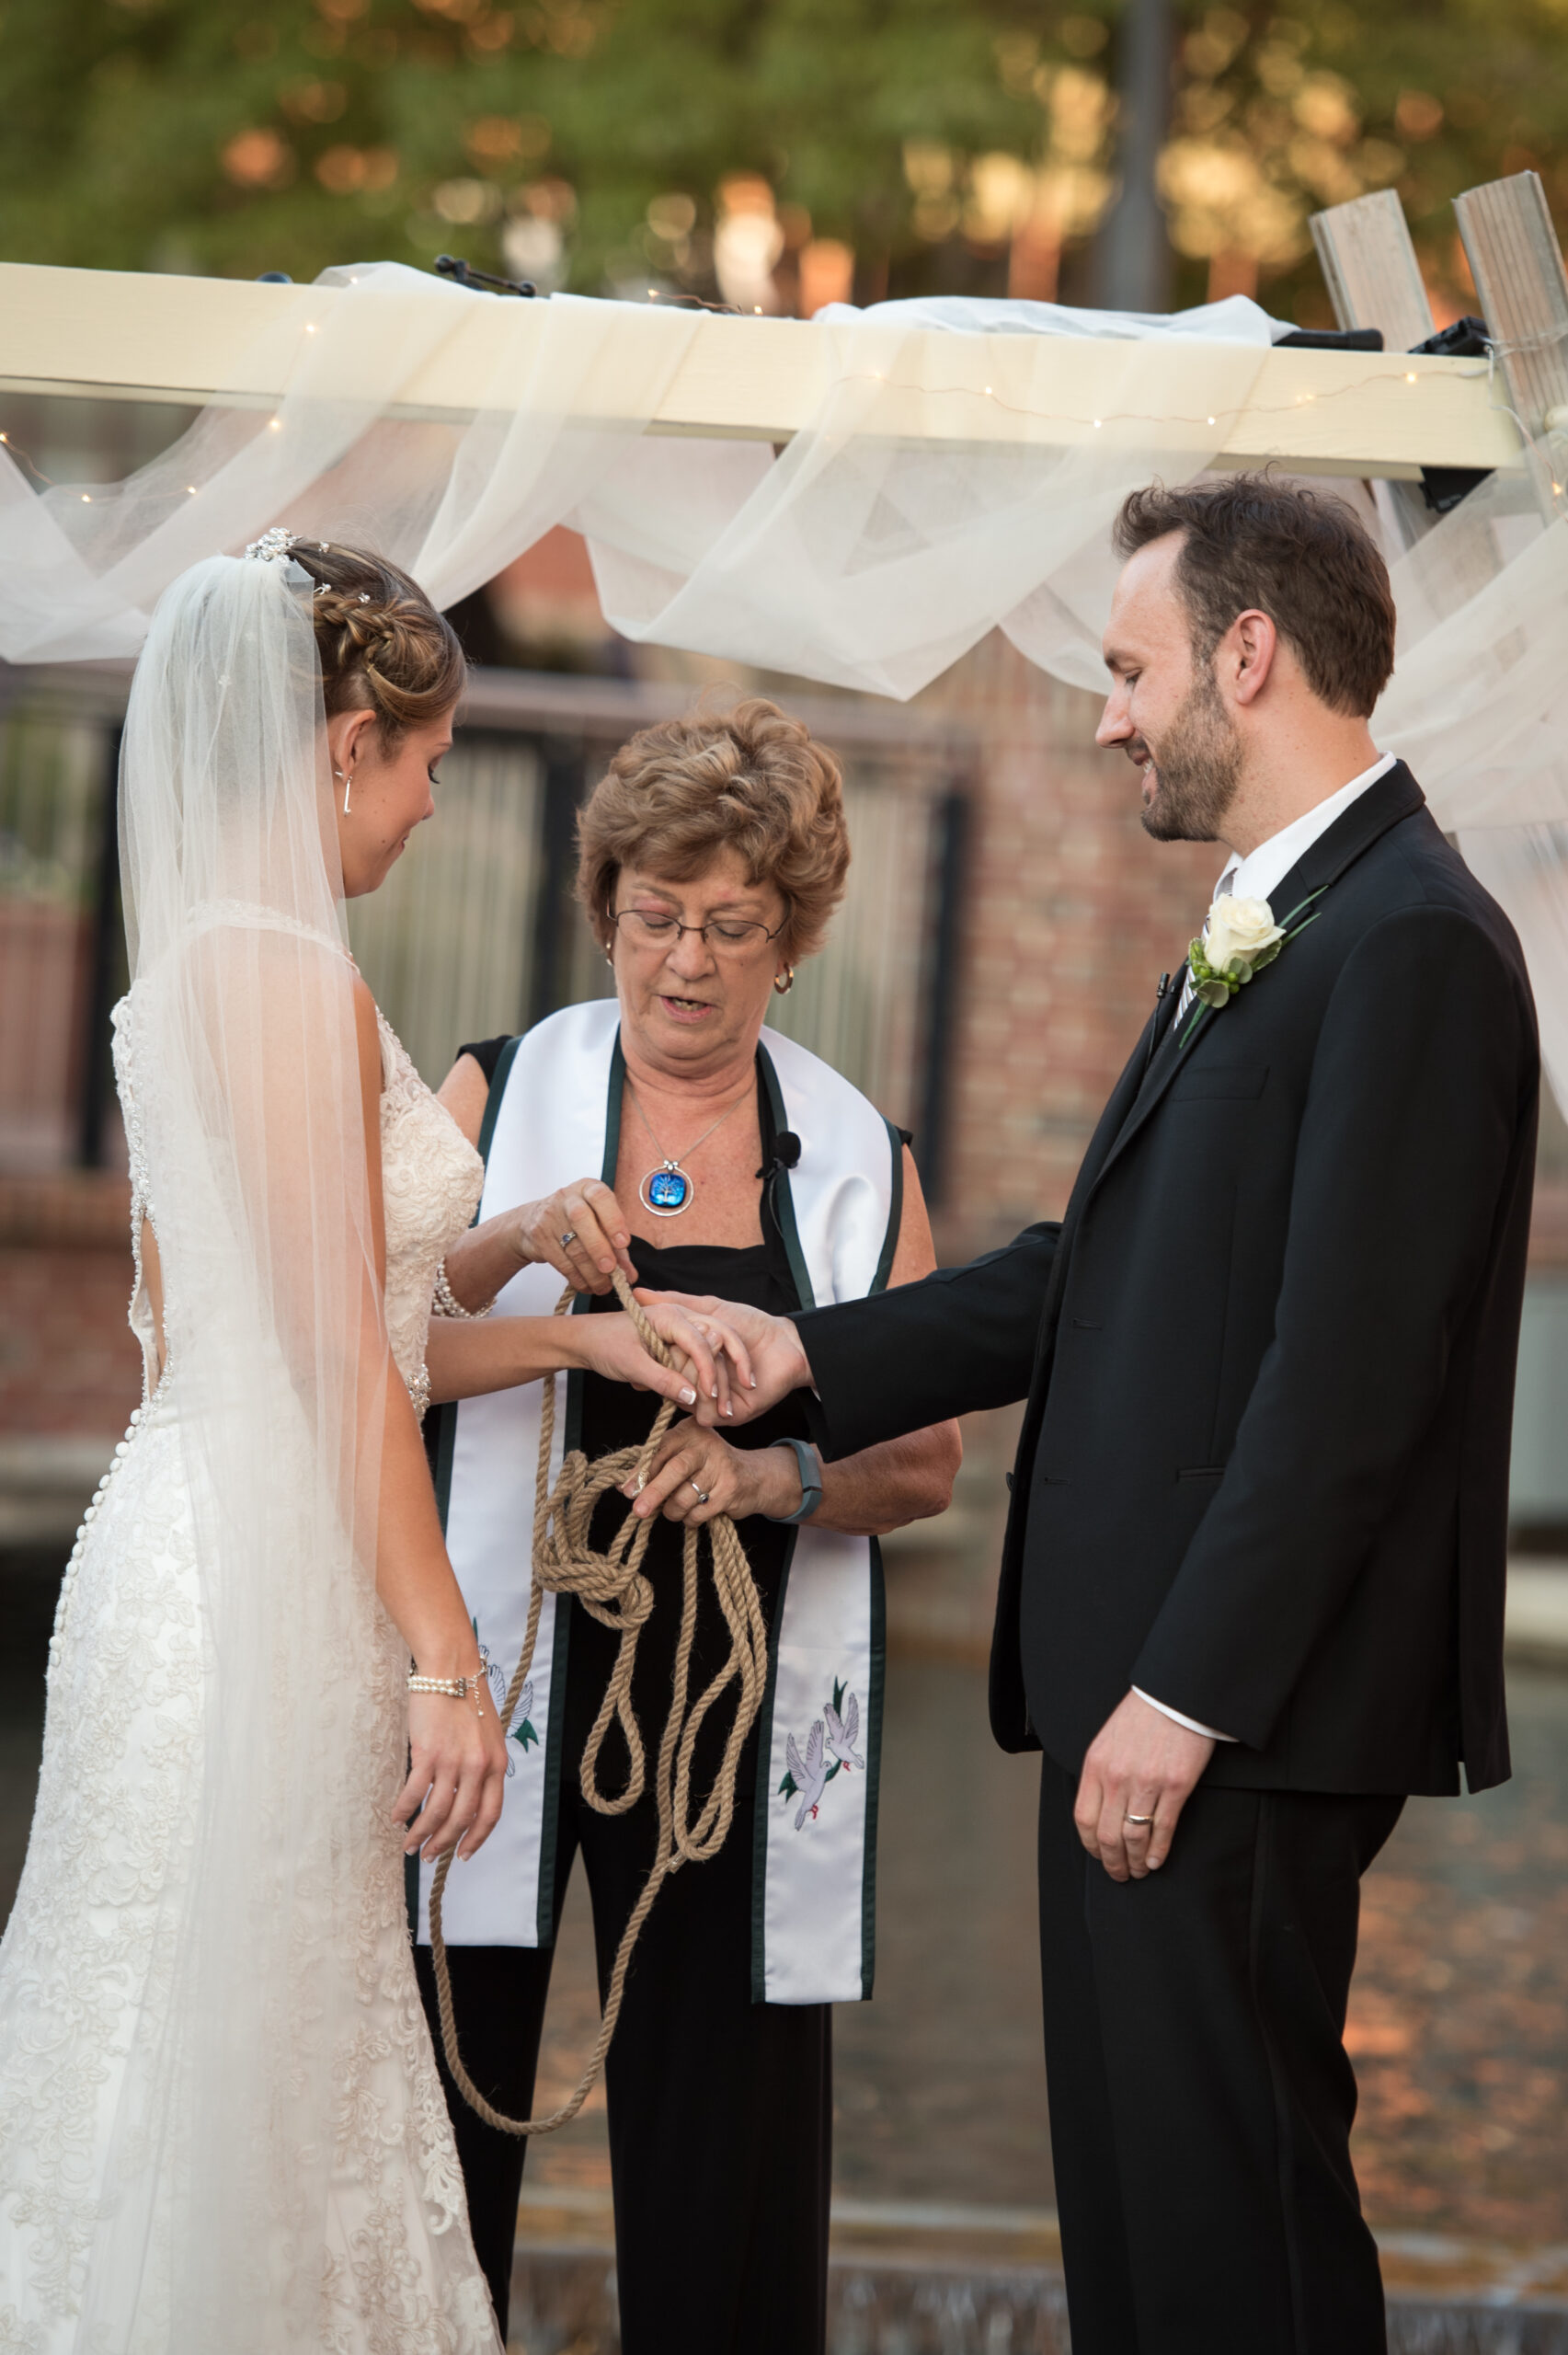 handfasting ceremony at Raleigh wedding